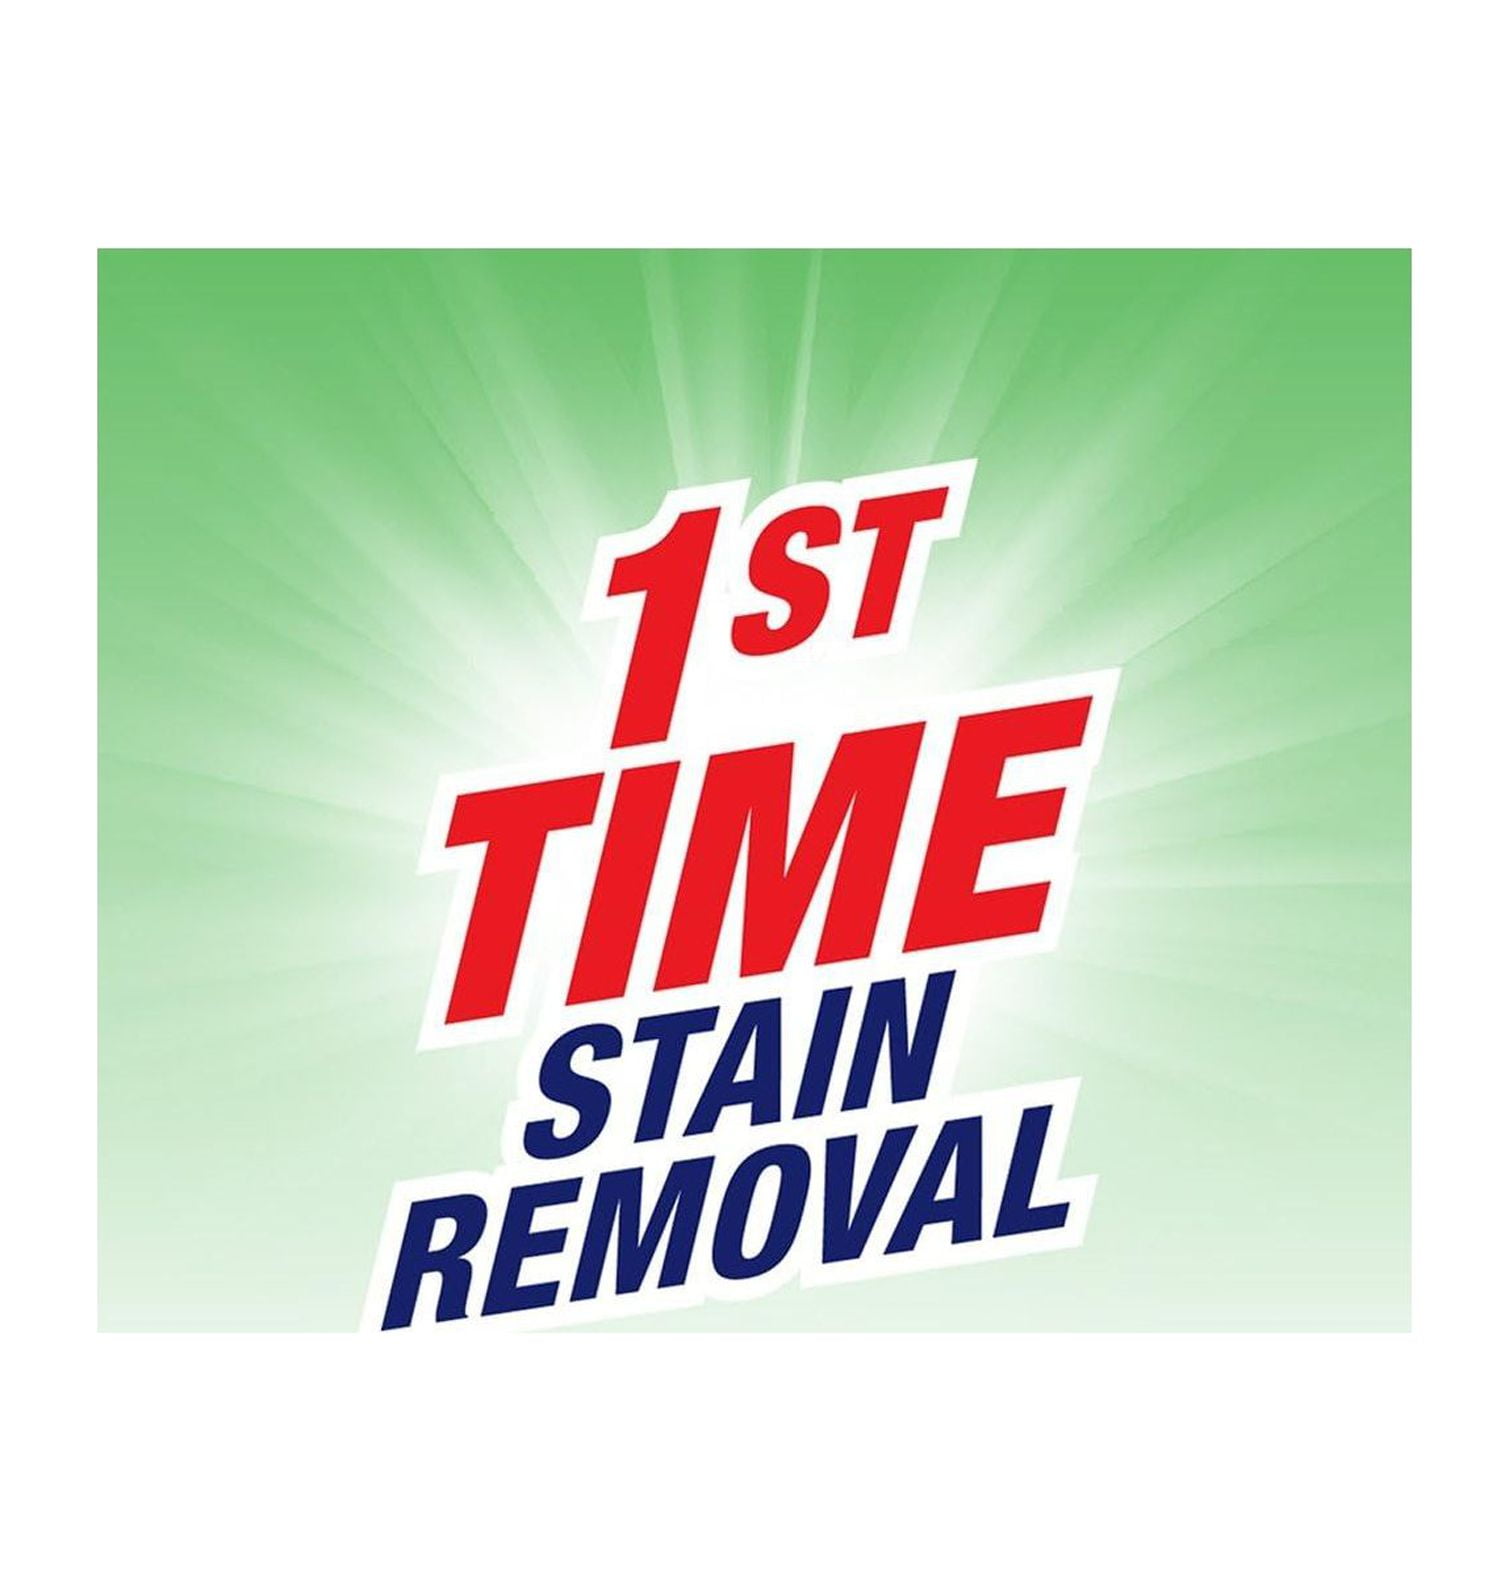 SPRAY 'N WASH® Laundry Stain Remover - Stain Stick